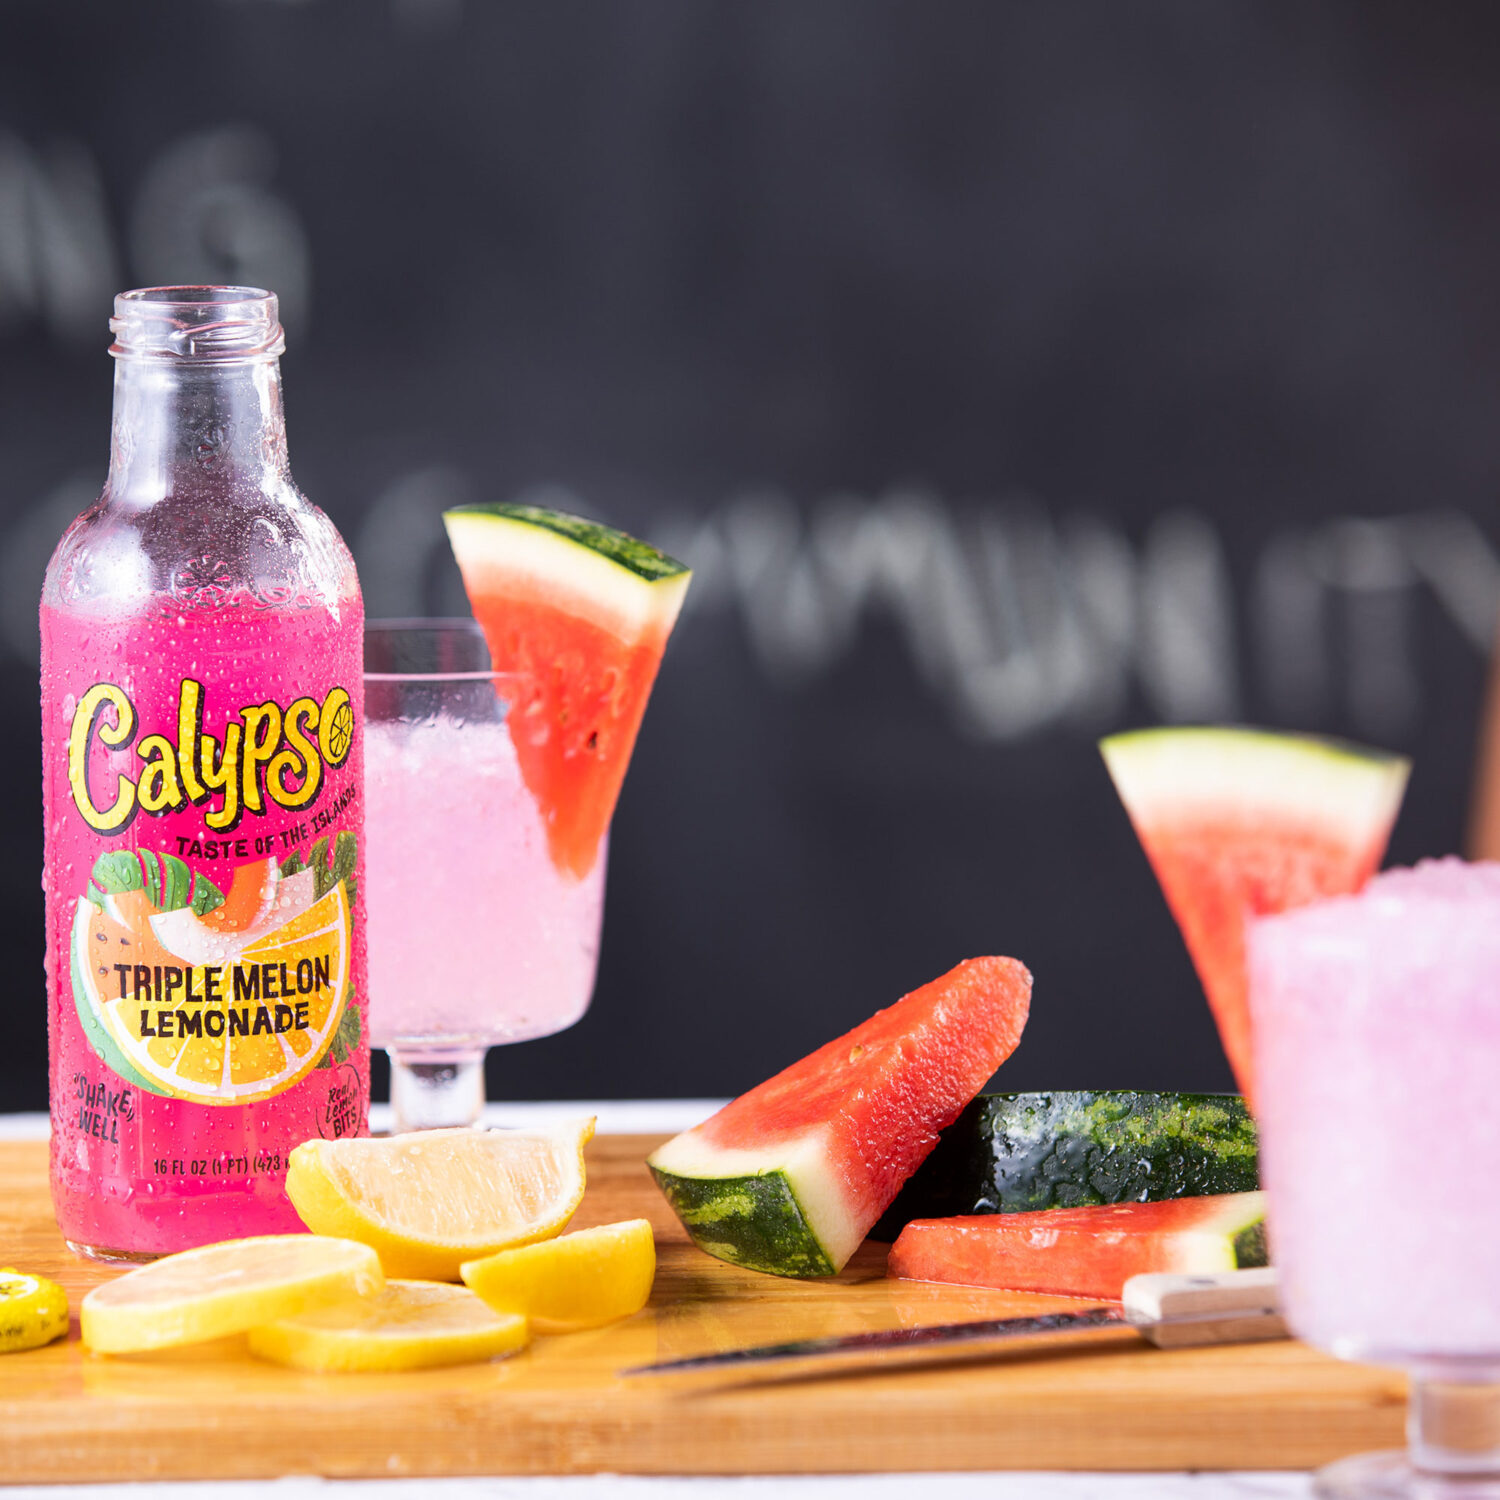 A bottle of Calypso Triple Melon Lemonade on a cutting board with sliced watermelon and lemons.